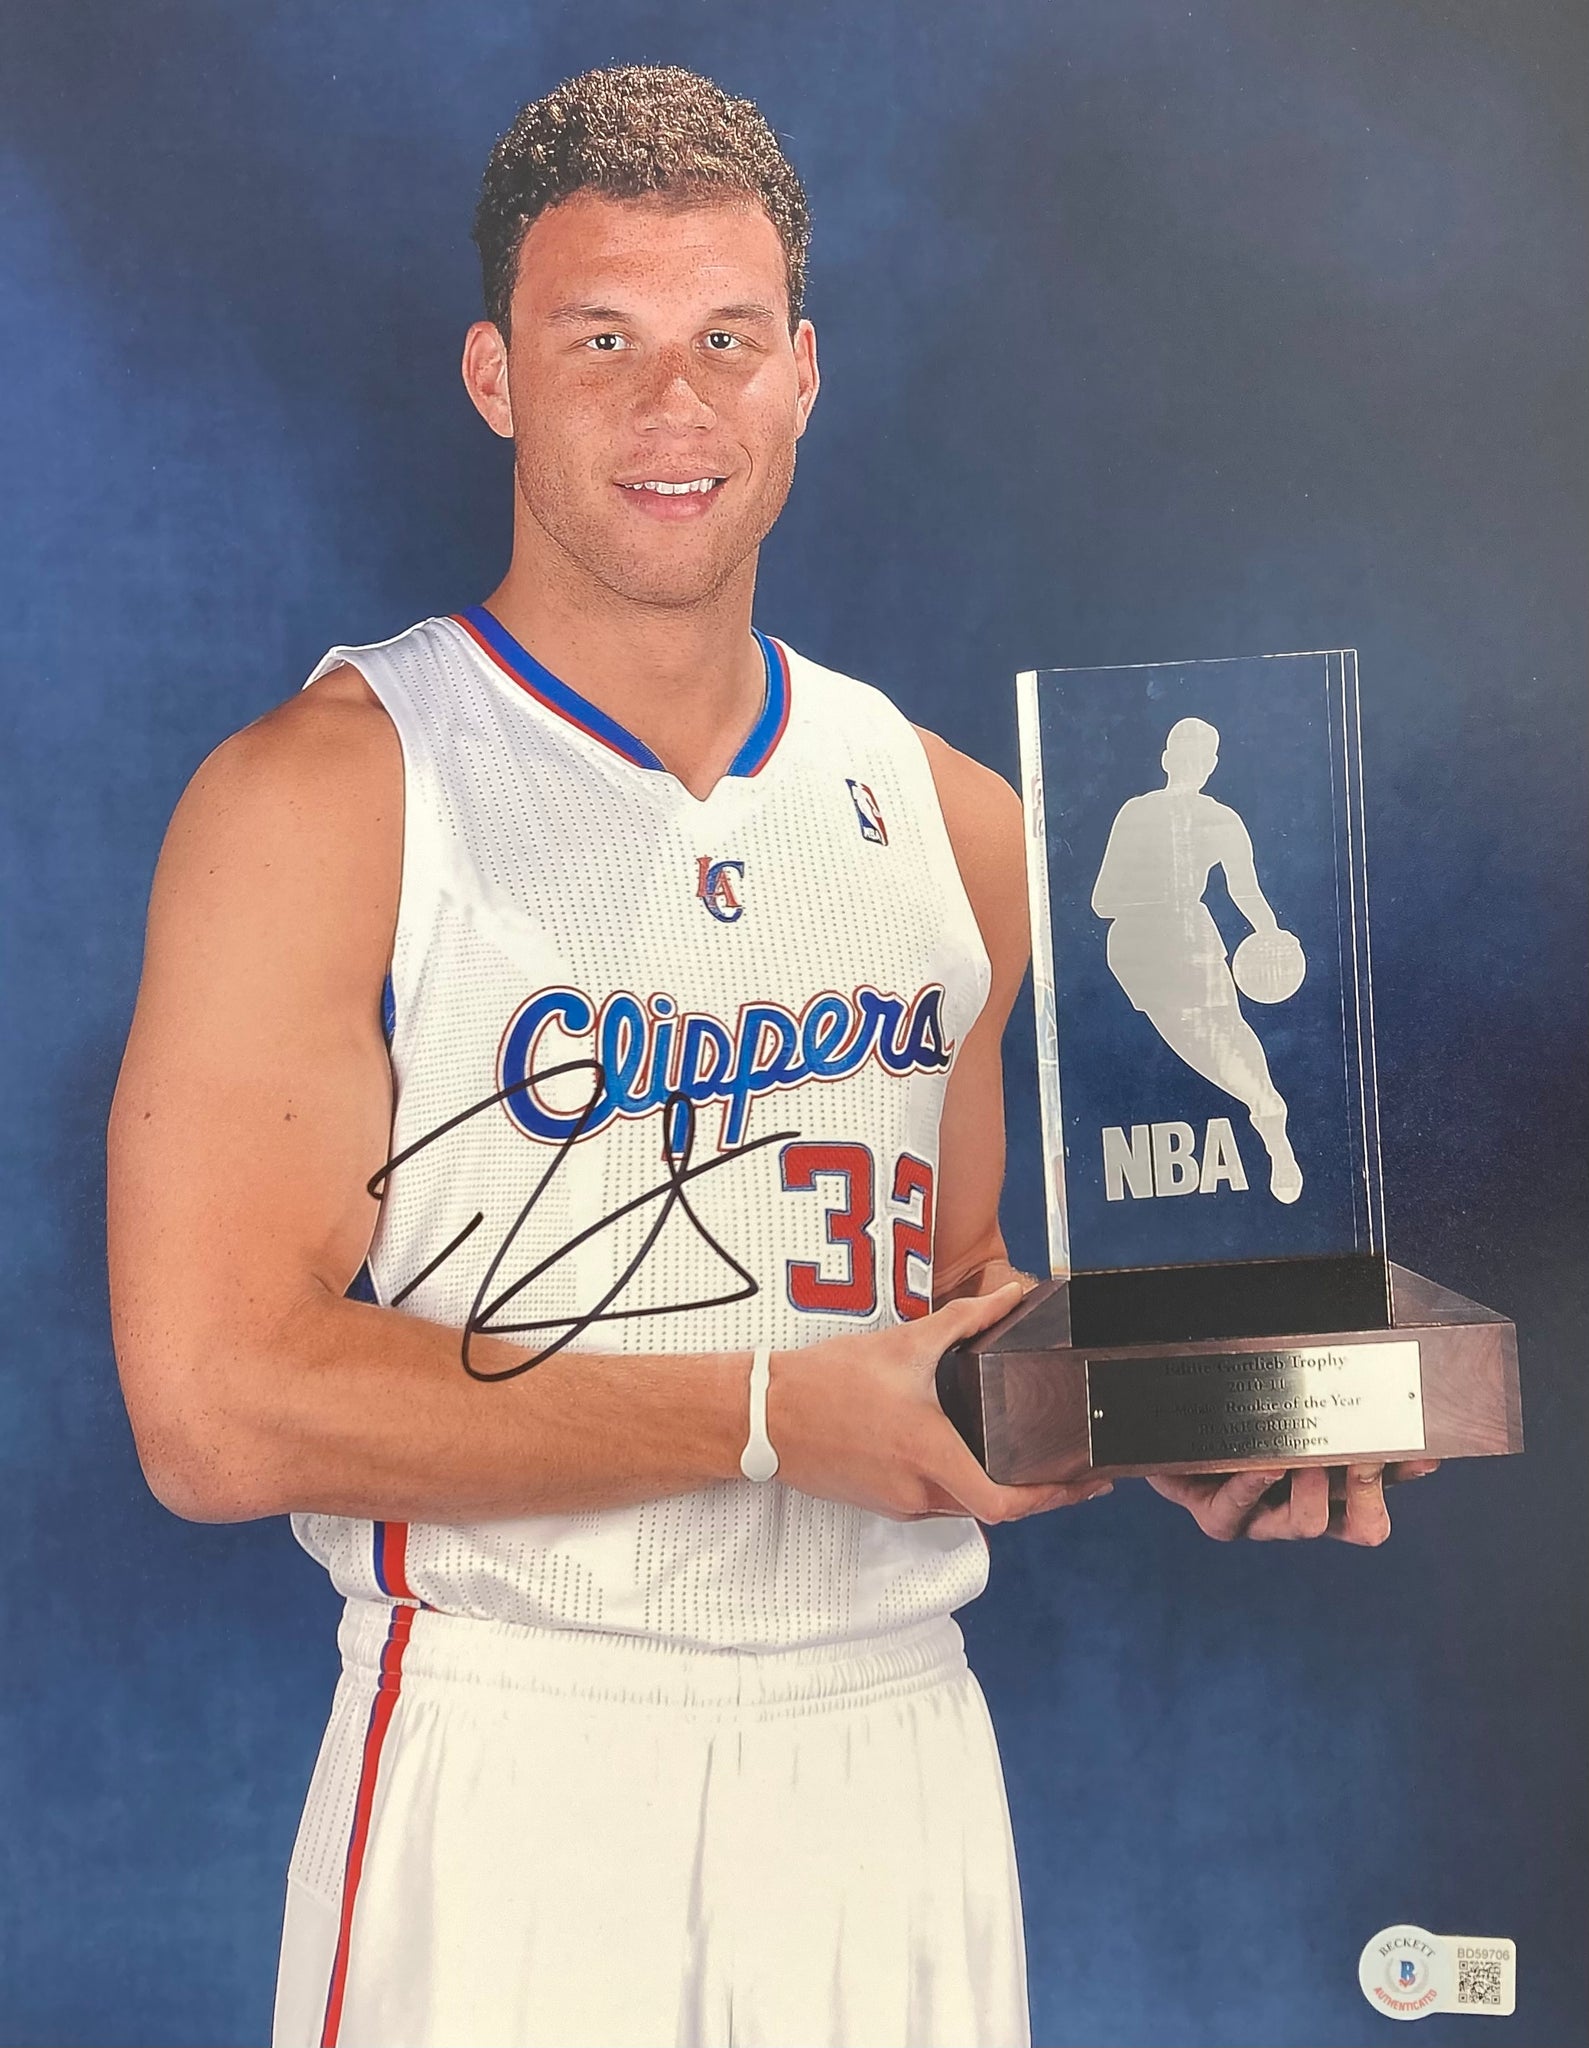 blake griffin clippers